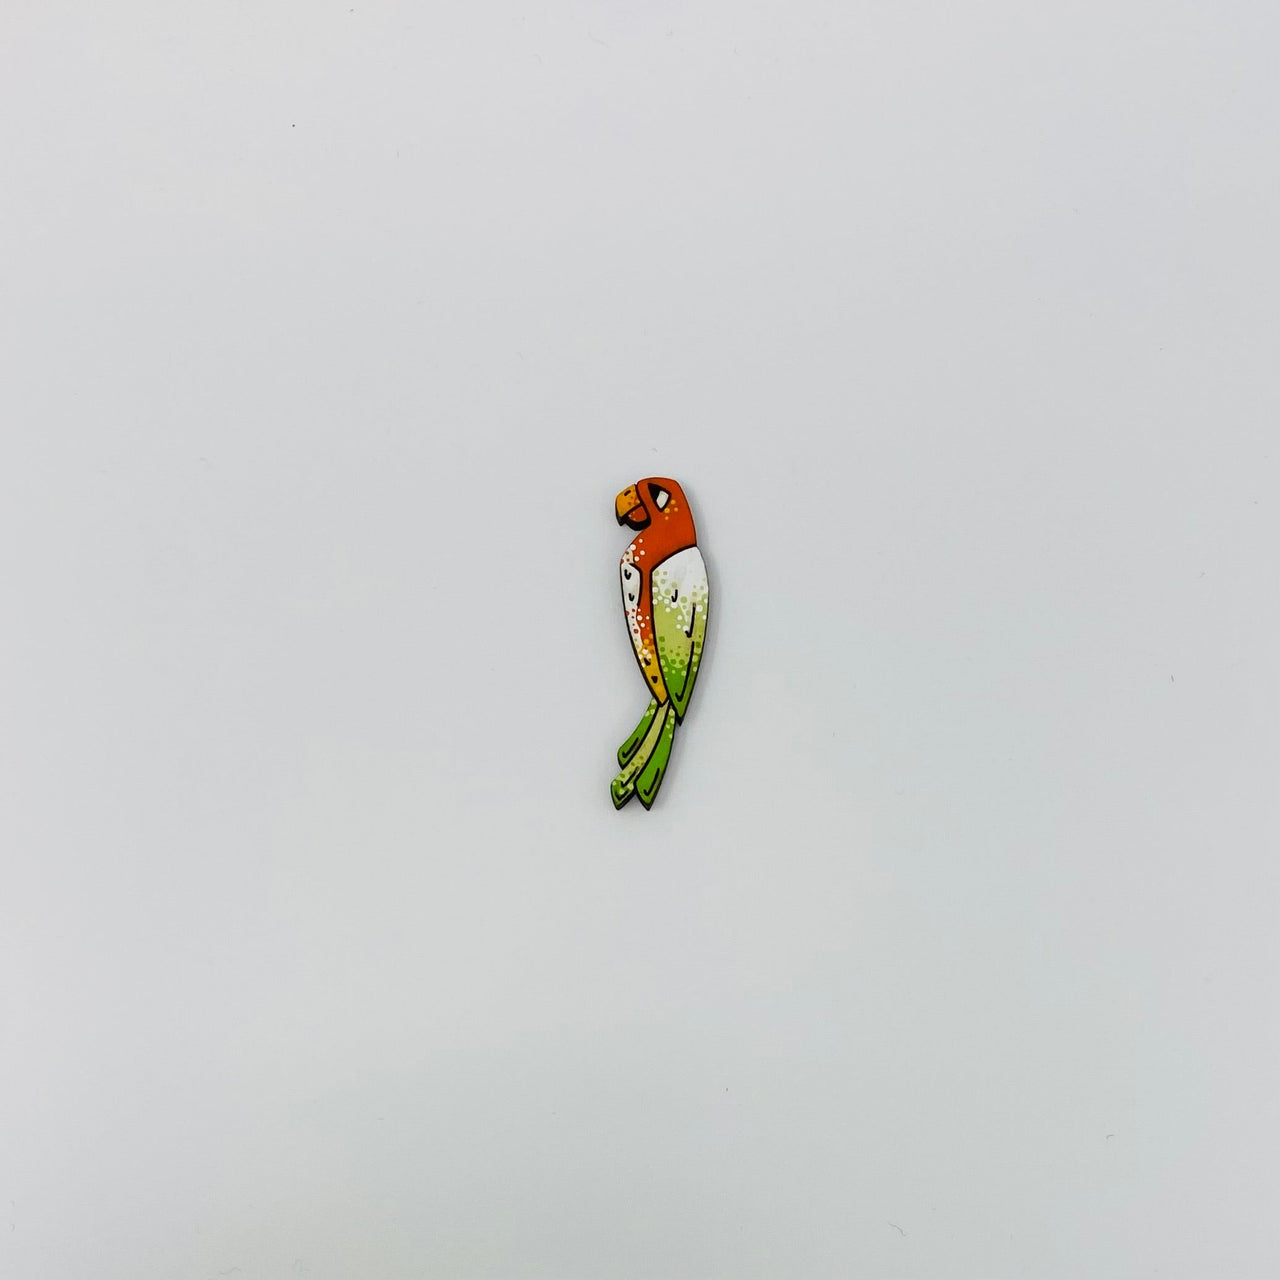 SALE! Hand Painted Parrot Litewood™️ Lapel Pin in Orange